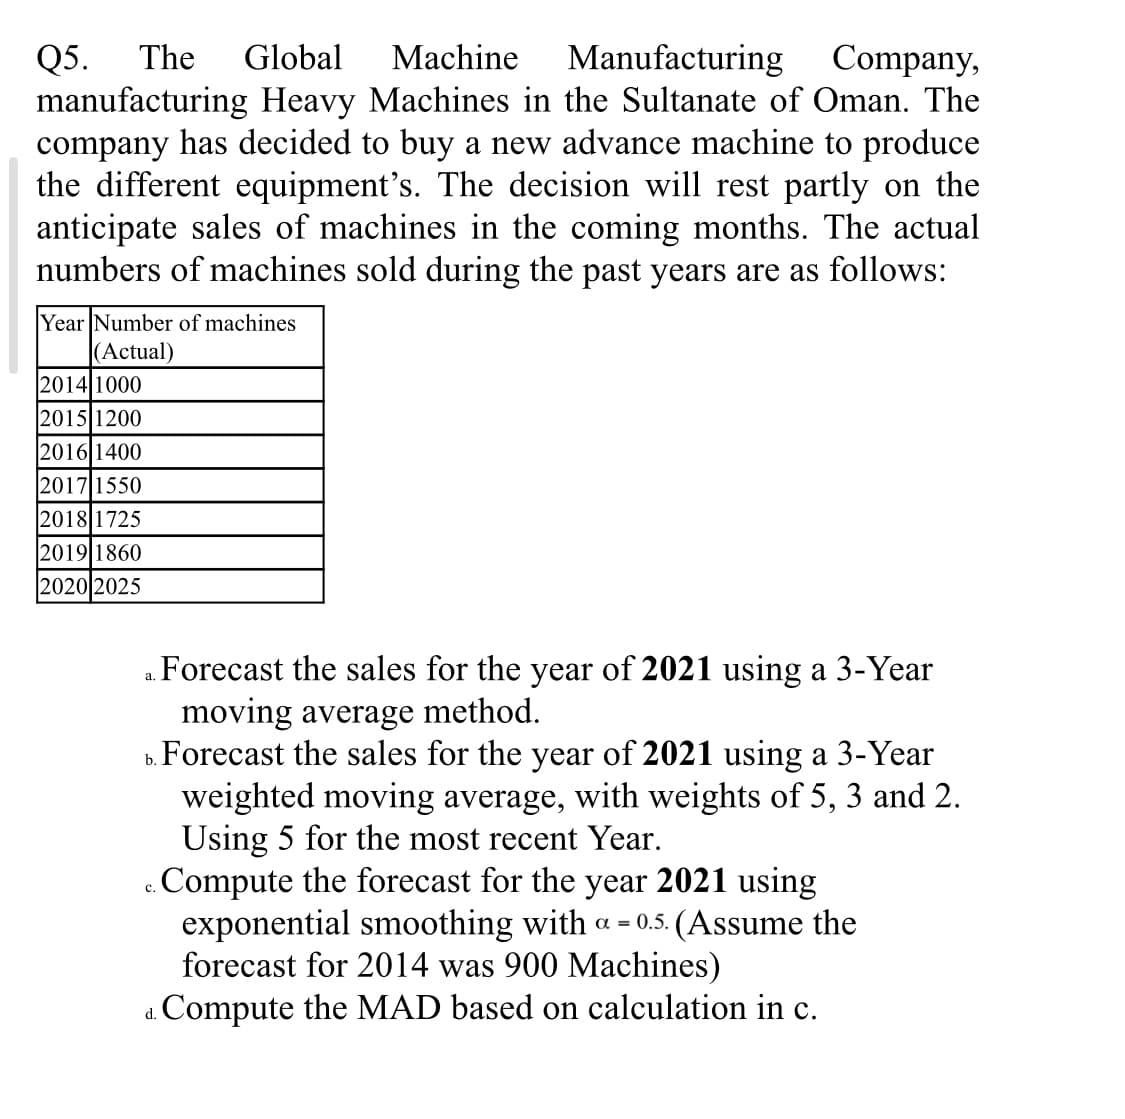 The
Global
Machine
Manufacturing Company,
Q5.
manufacturing Heavy Machines in the Sultanate of Oman. The
company has decided to buy a new advance machine to produce
the different equipment's. The decision will rest partly on the
anticipate sales of machines in the coming months. The actual
numbers of machines sold during the past years are as follows:
Year Number of machines
(Actual)
2014 1000
|2015|1200
2016 1400
2017 1550
2018 1725
2019|1860
2020 2025
a. Forecast the sales for the year of 2021 using a 3-Year
moving average method.
b. Forecast the sales for the year of 2021 using a 3-Year
weighted moving average, with weights of 5, 3 and 2.
Using 5 for the most recent Year.
c. Compute the forecast for the year 2021 using
exponential smoothing with a = 0.5. (Assume the
forecast for 2014 was 900 Machines)
Compute the MAD based on calculation in c.
с.
d.
